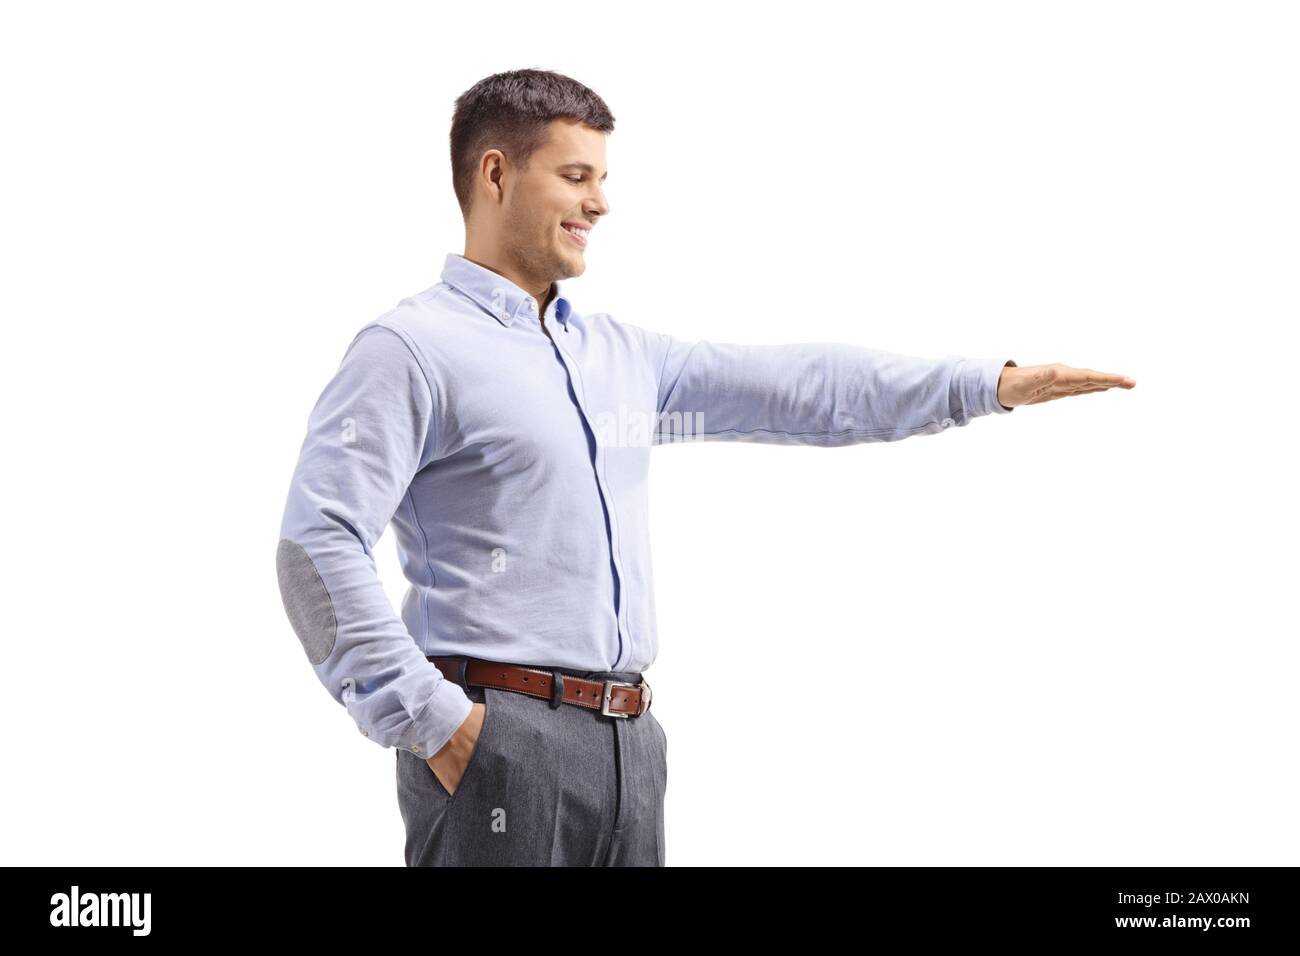 Man gesturing with hand and showing the height of something isolated on white background Stock Photo